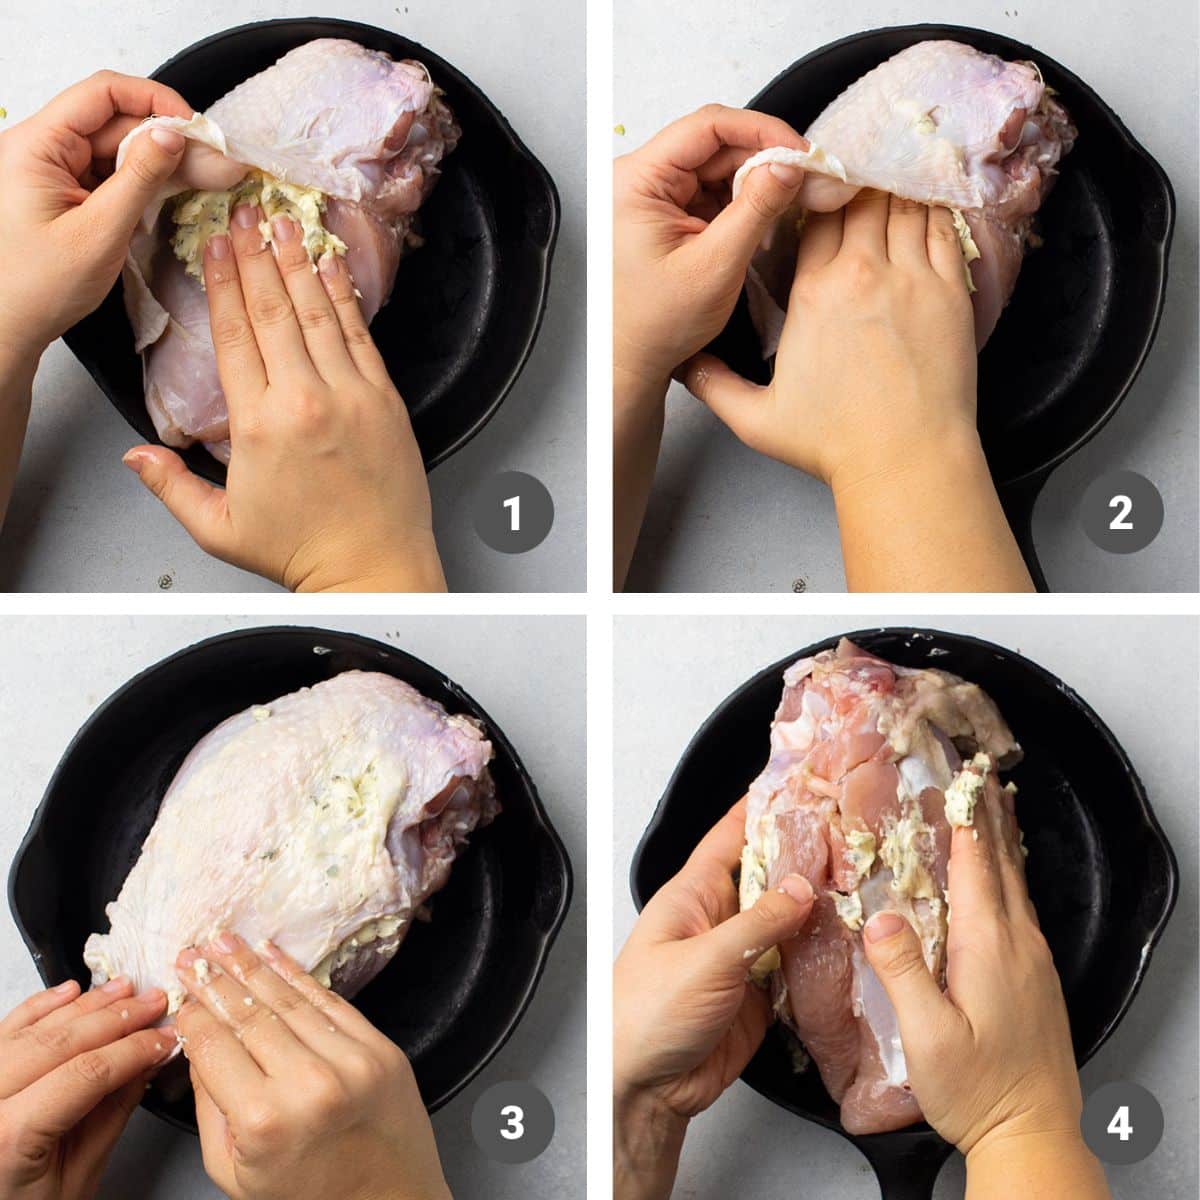 Hands spreading compound butter under the skin of a turkey breast.